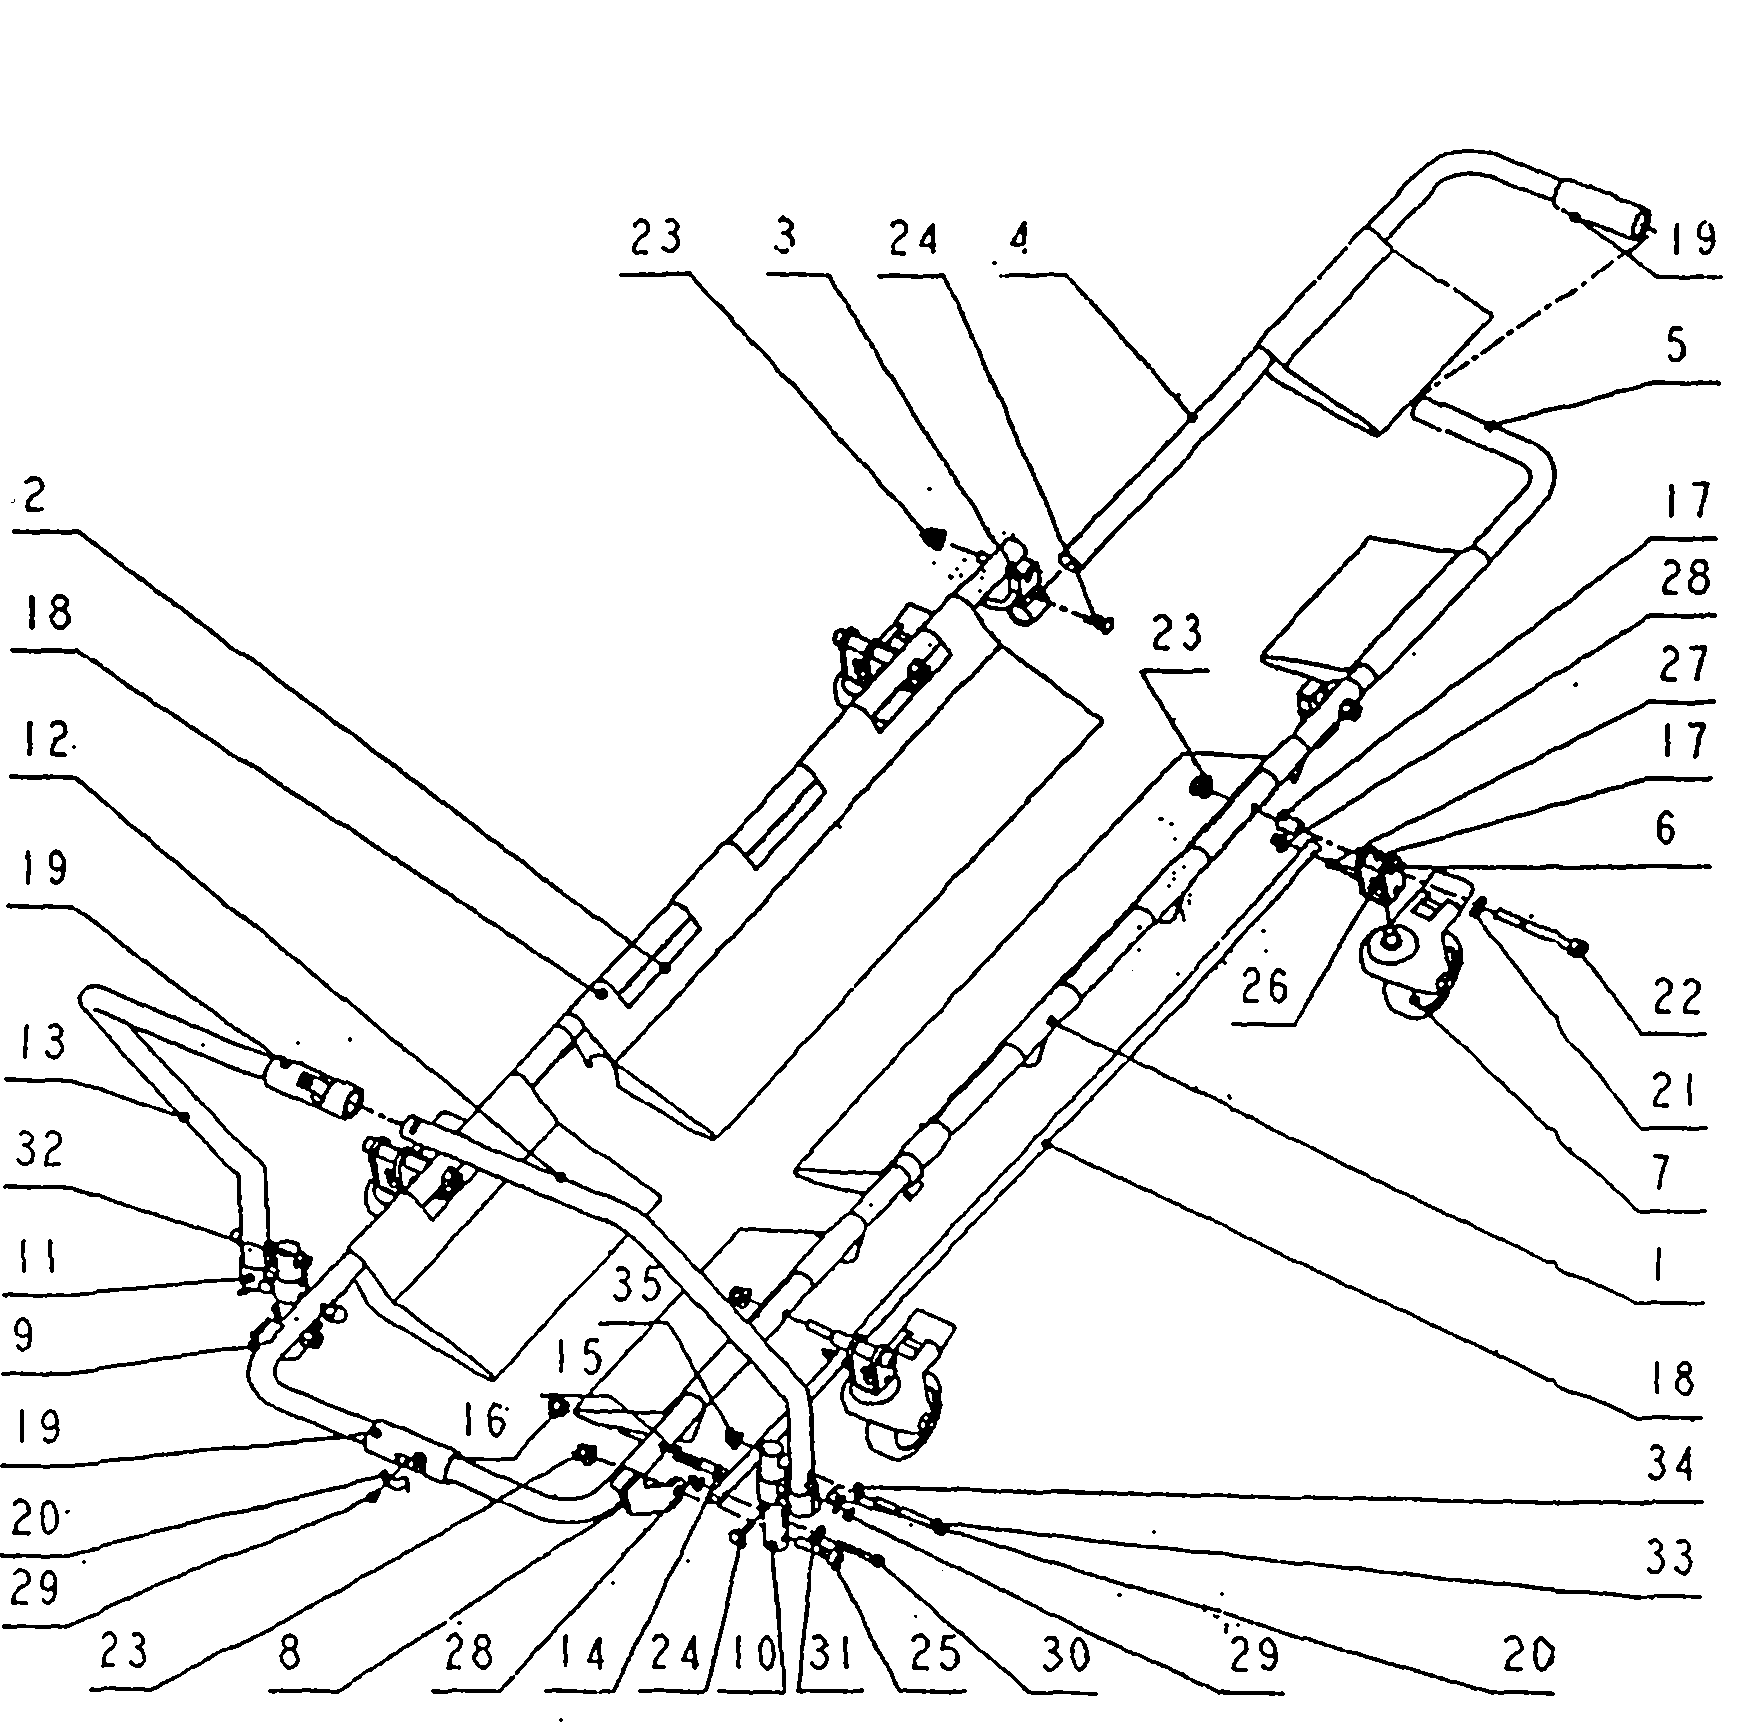 Individual first-aid stretcher structure and device